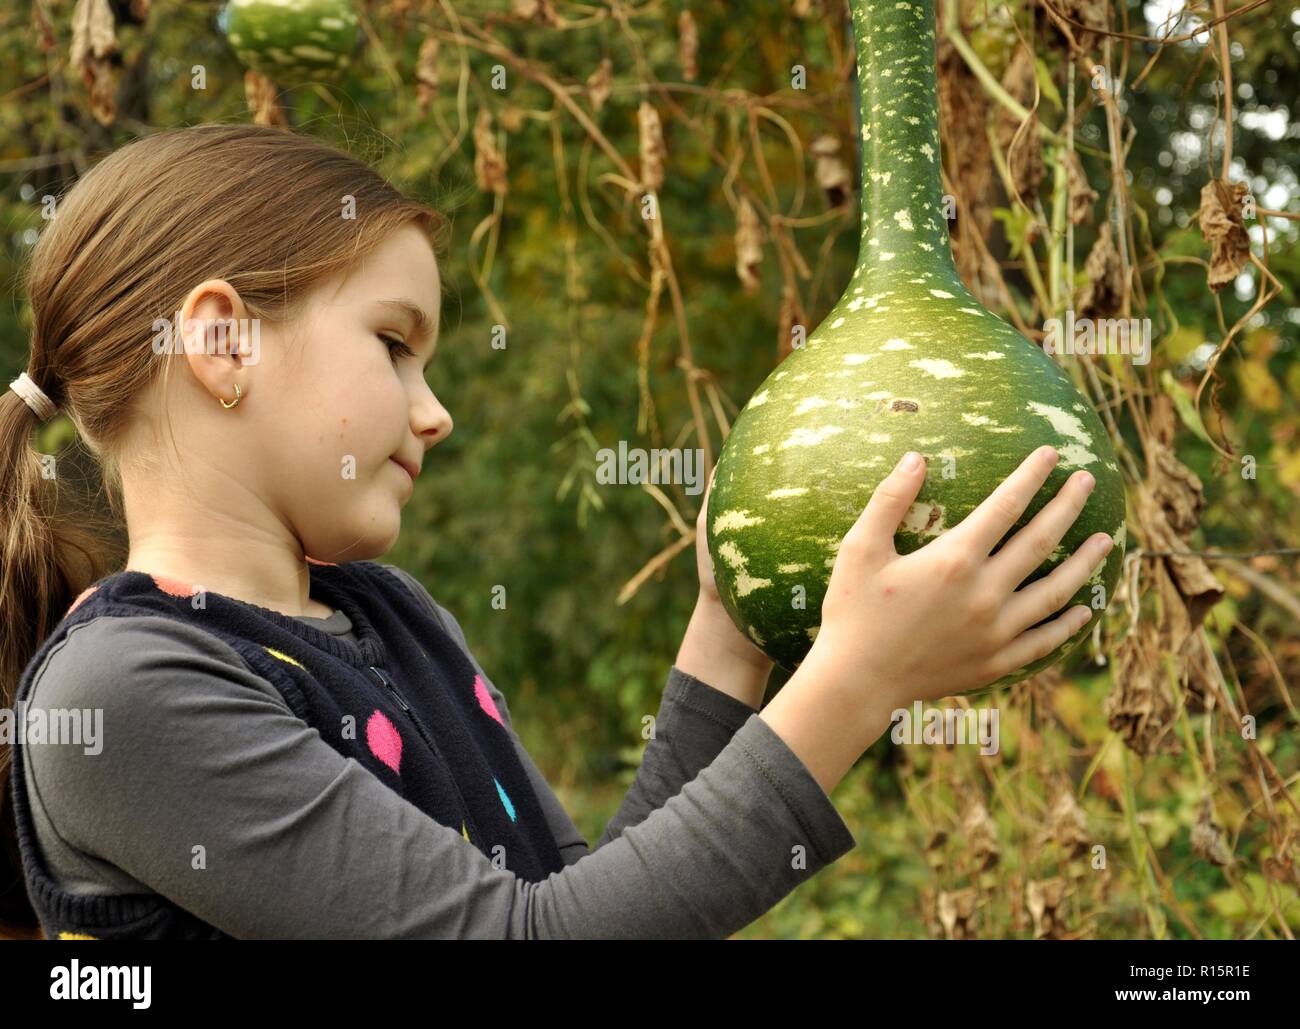 Caucasian 8 years old child, girl, happy in the park, looking at a big bottle gourd Stock Photo